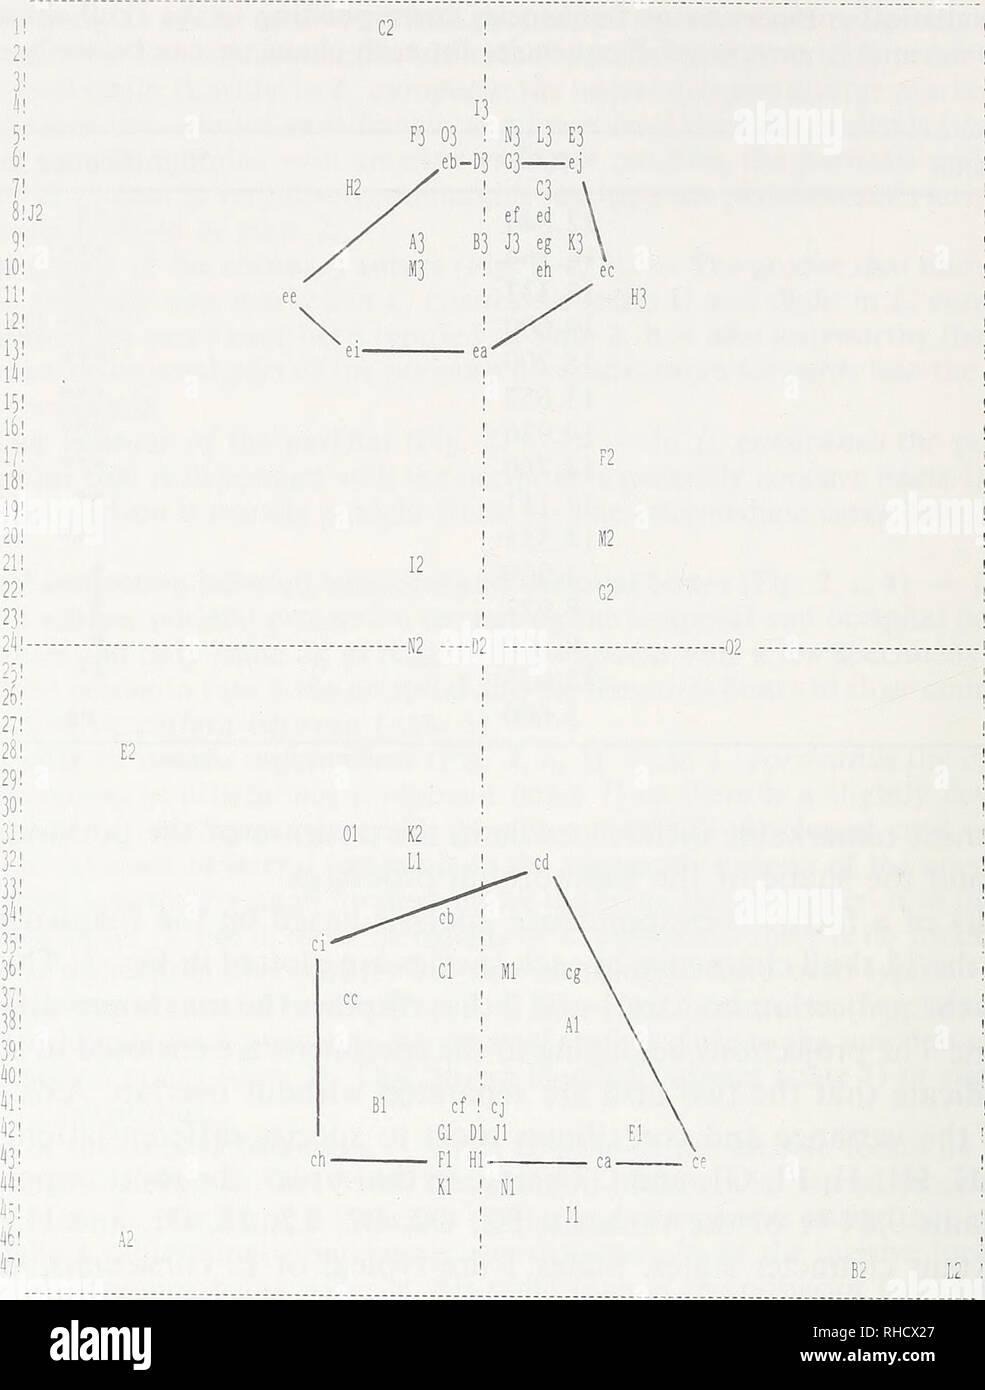 . Bonner zoologische Beiträge : Herausgeber: Zoologisches Forschungsinstitut und Museum Alexander Koenig, Bonn. Biology; Zoology. 72 R Palacios. Fig. 3: Projection of the frequencies corresponding to the skull character states of L. cor- sicanus and L. europaeus specimens in relation to axes 1 (vertical) and 2 (horizontal) of the correspondence factor analysis. Couples of lower case letters represent the specimens of each species (e = L. europaeus; c = L. corsicanus; a, b, c . . = same specimens and order as in Table 5) and upper case letters followed by numbers 1, 2, 3 represent the skull cha Stock Photo